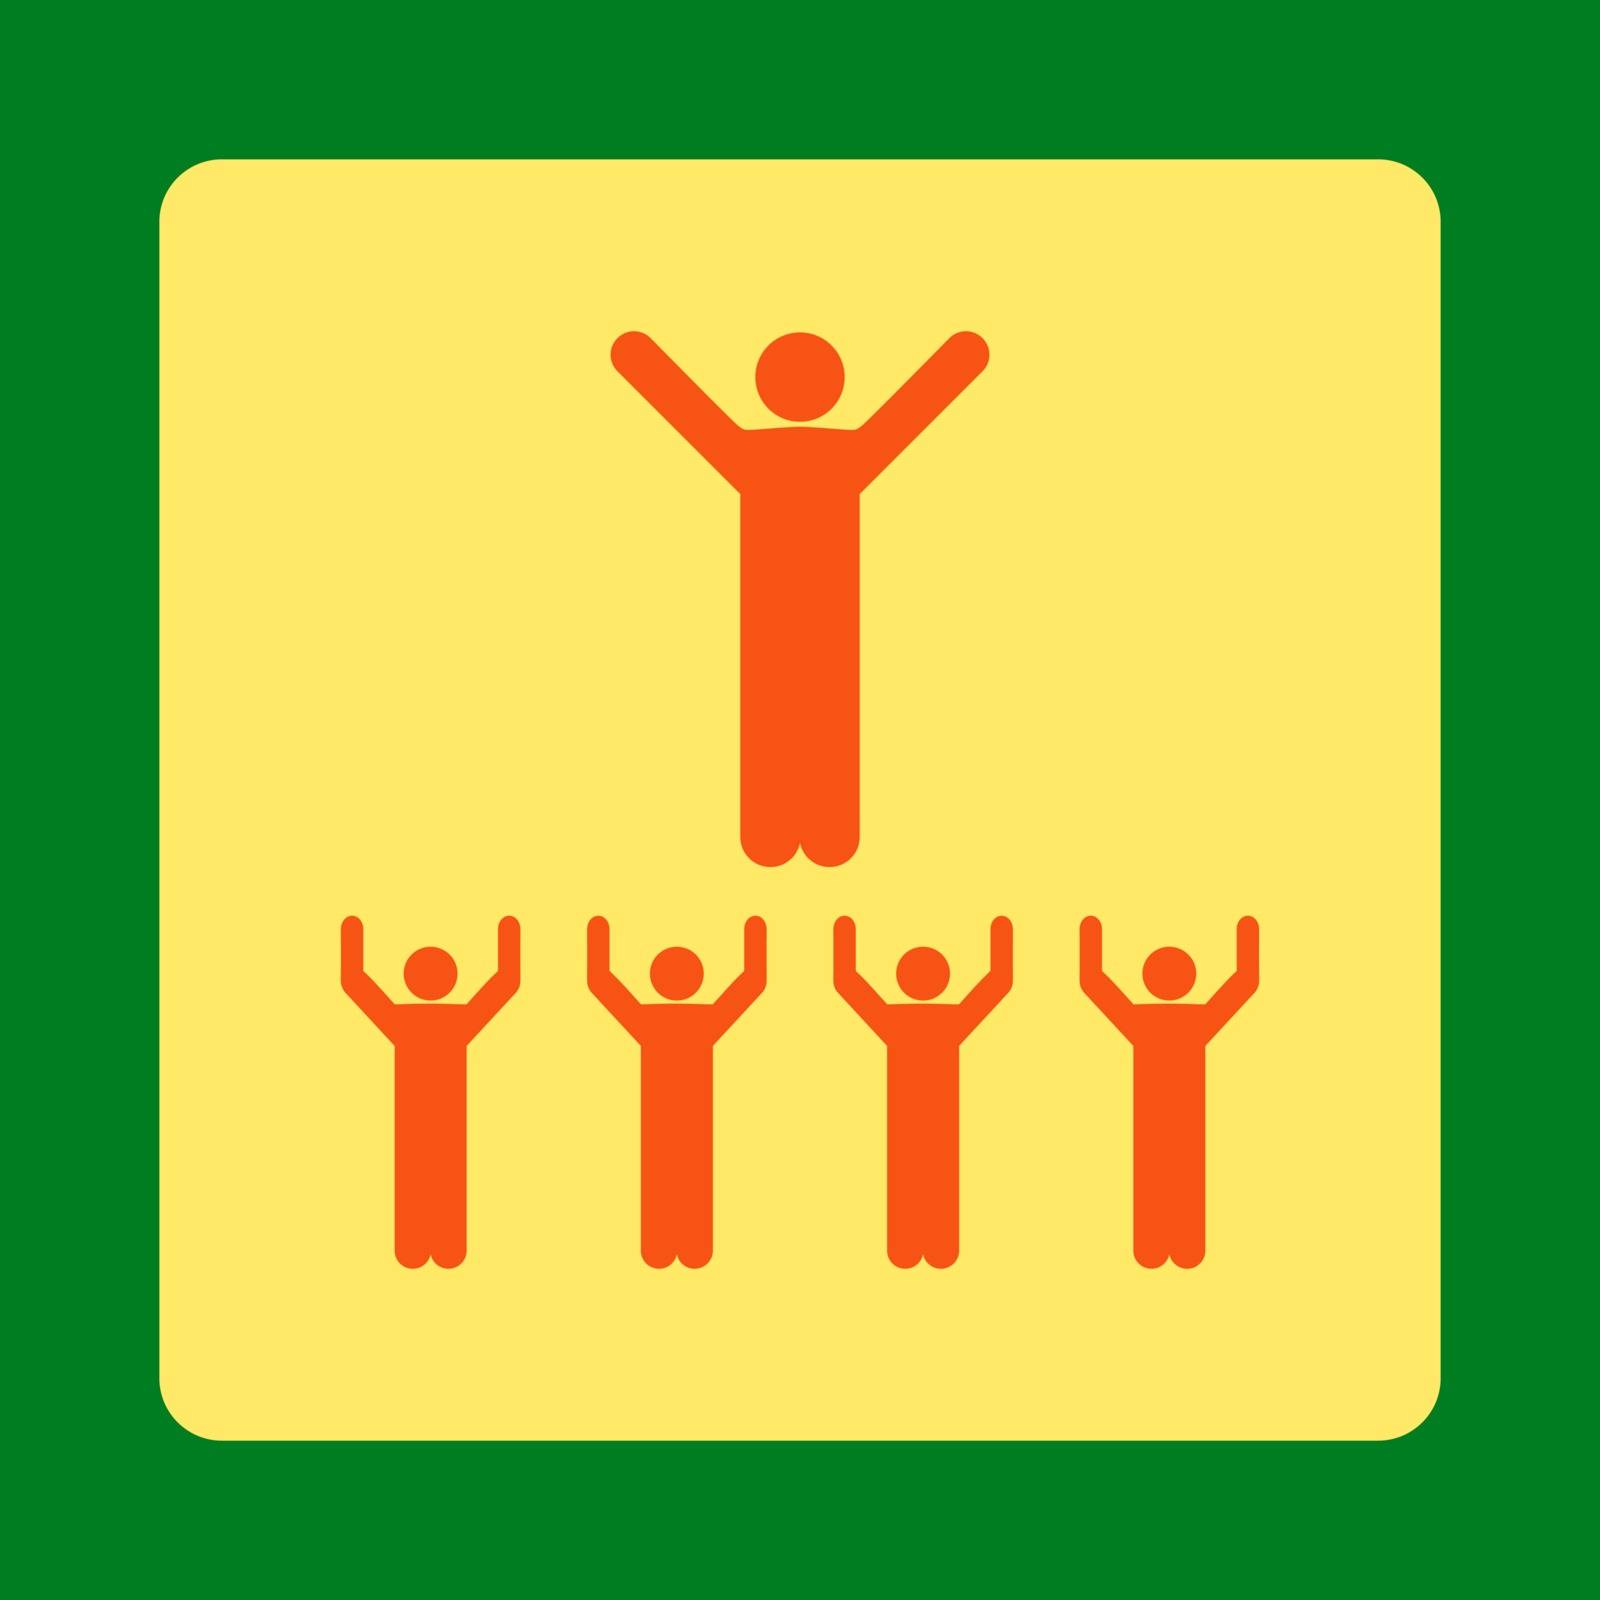 Religion icon. This flat rounded square button uses orange and yellow colors and isolated on a green background.